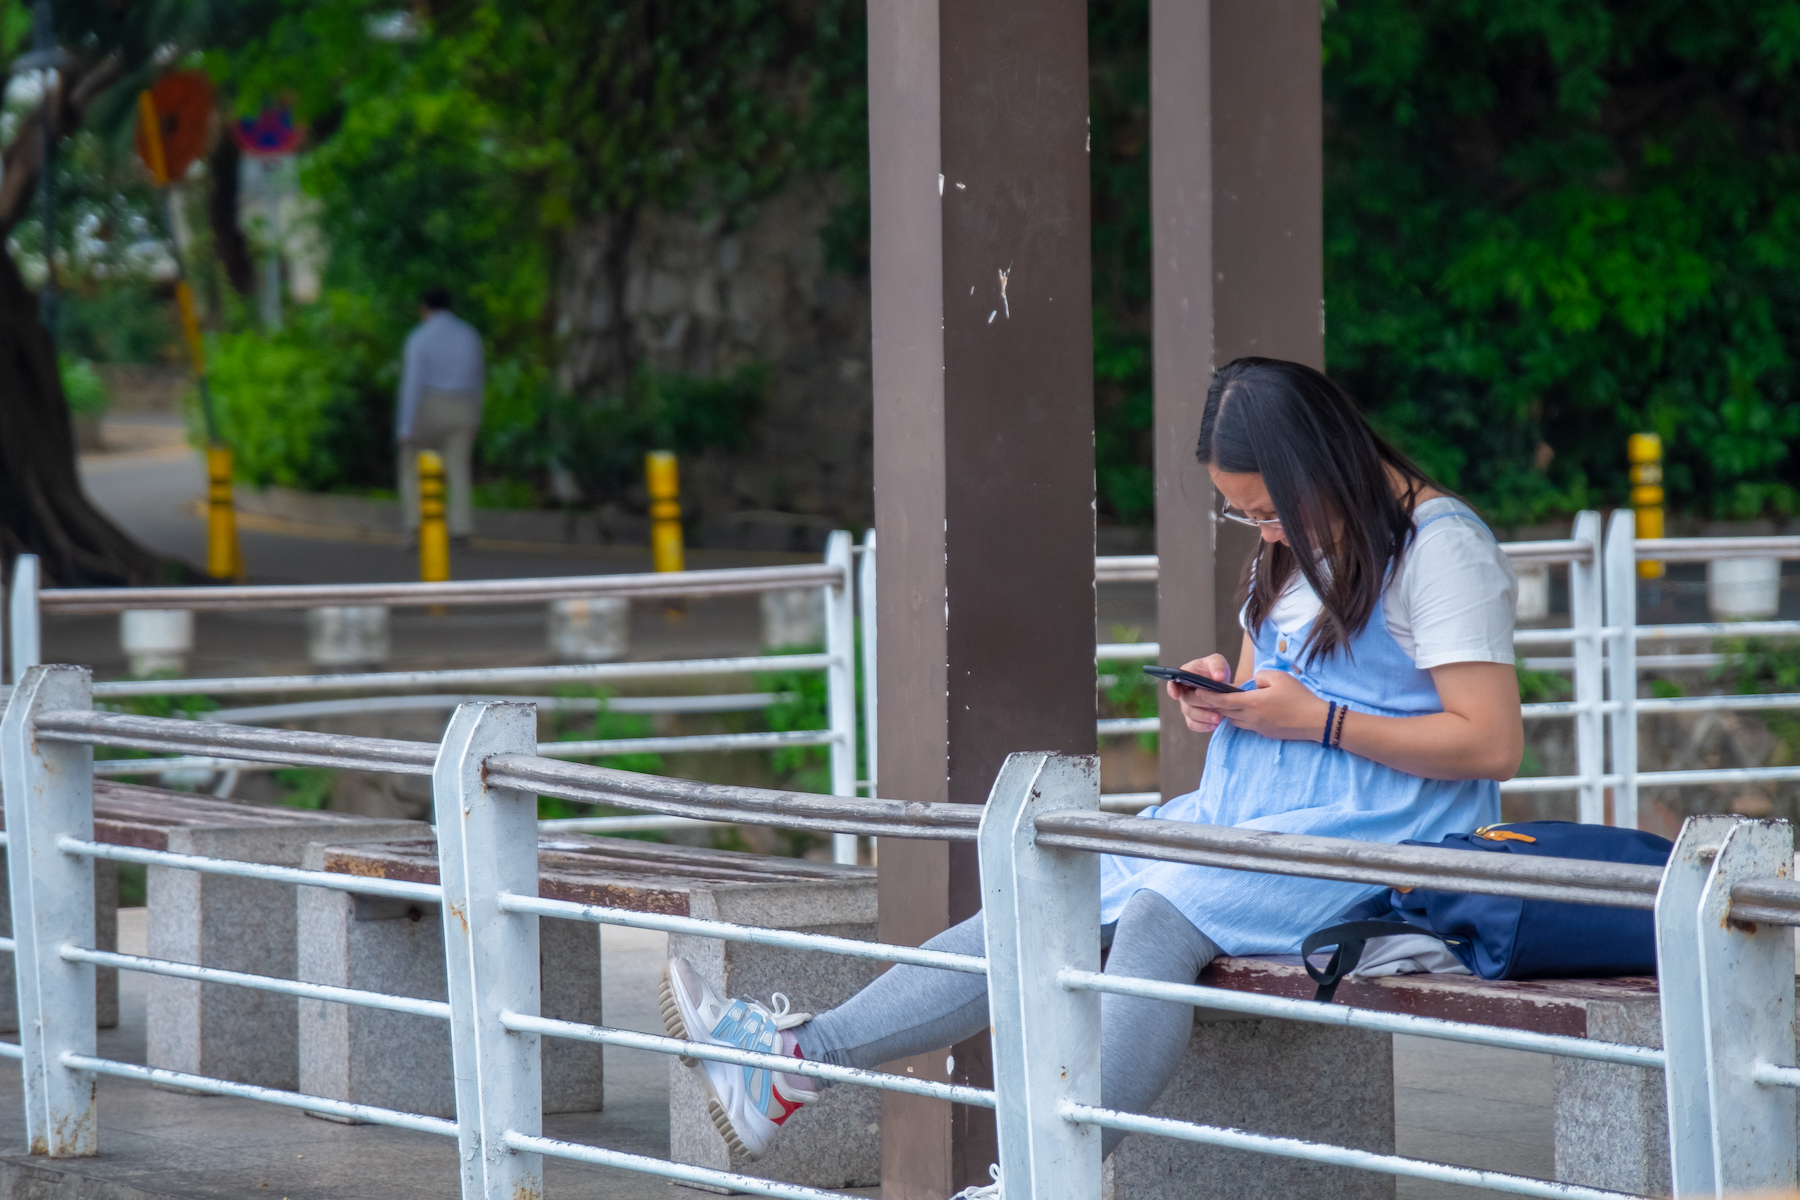 A pregnant woman sits on a bench in a public space in China